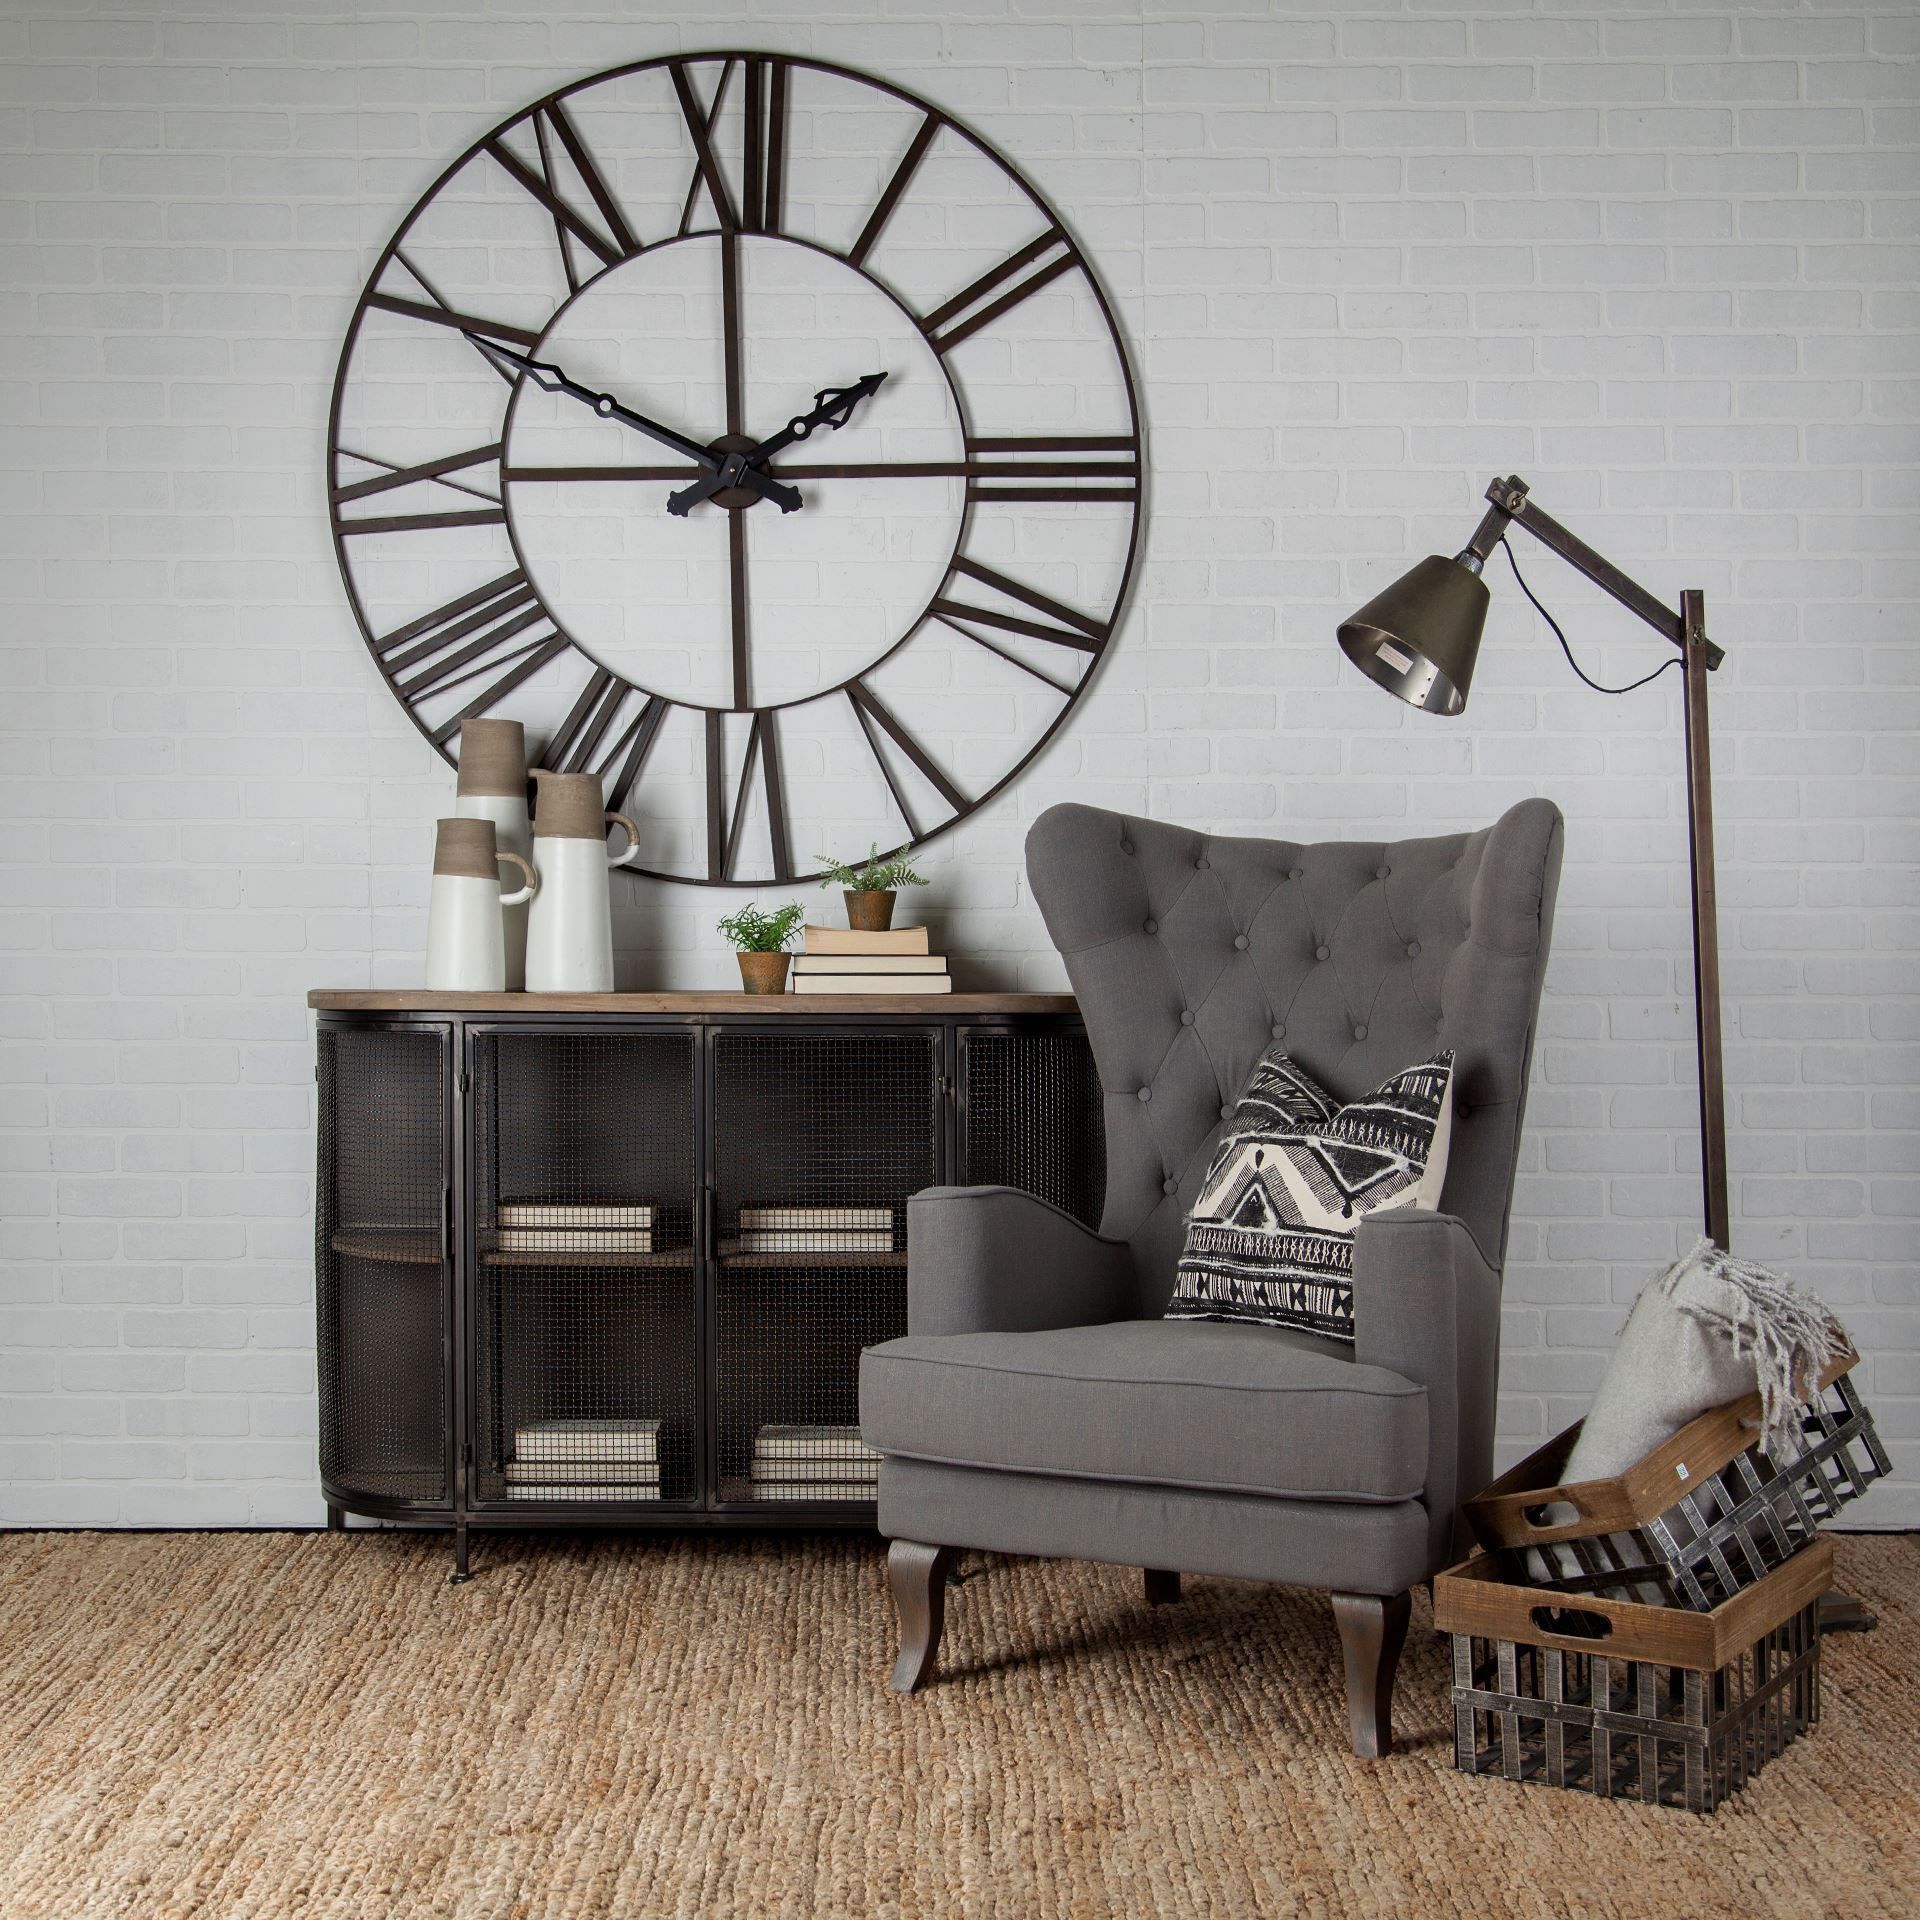 50" Round XL Industrial styleWall Clock w/ Open Back Face w/ Welded Iron Roman Numeral